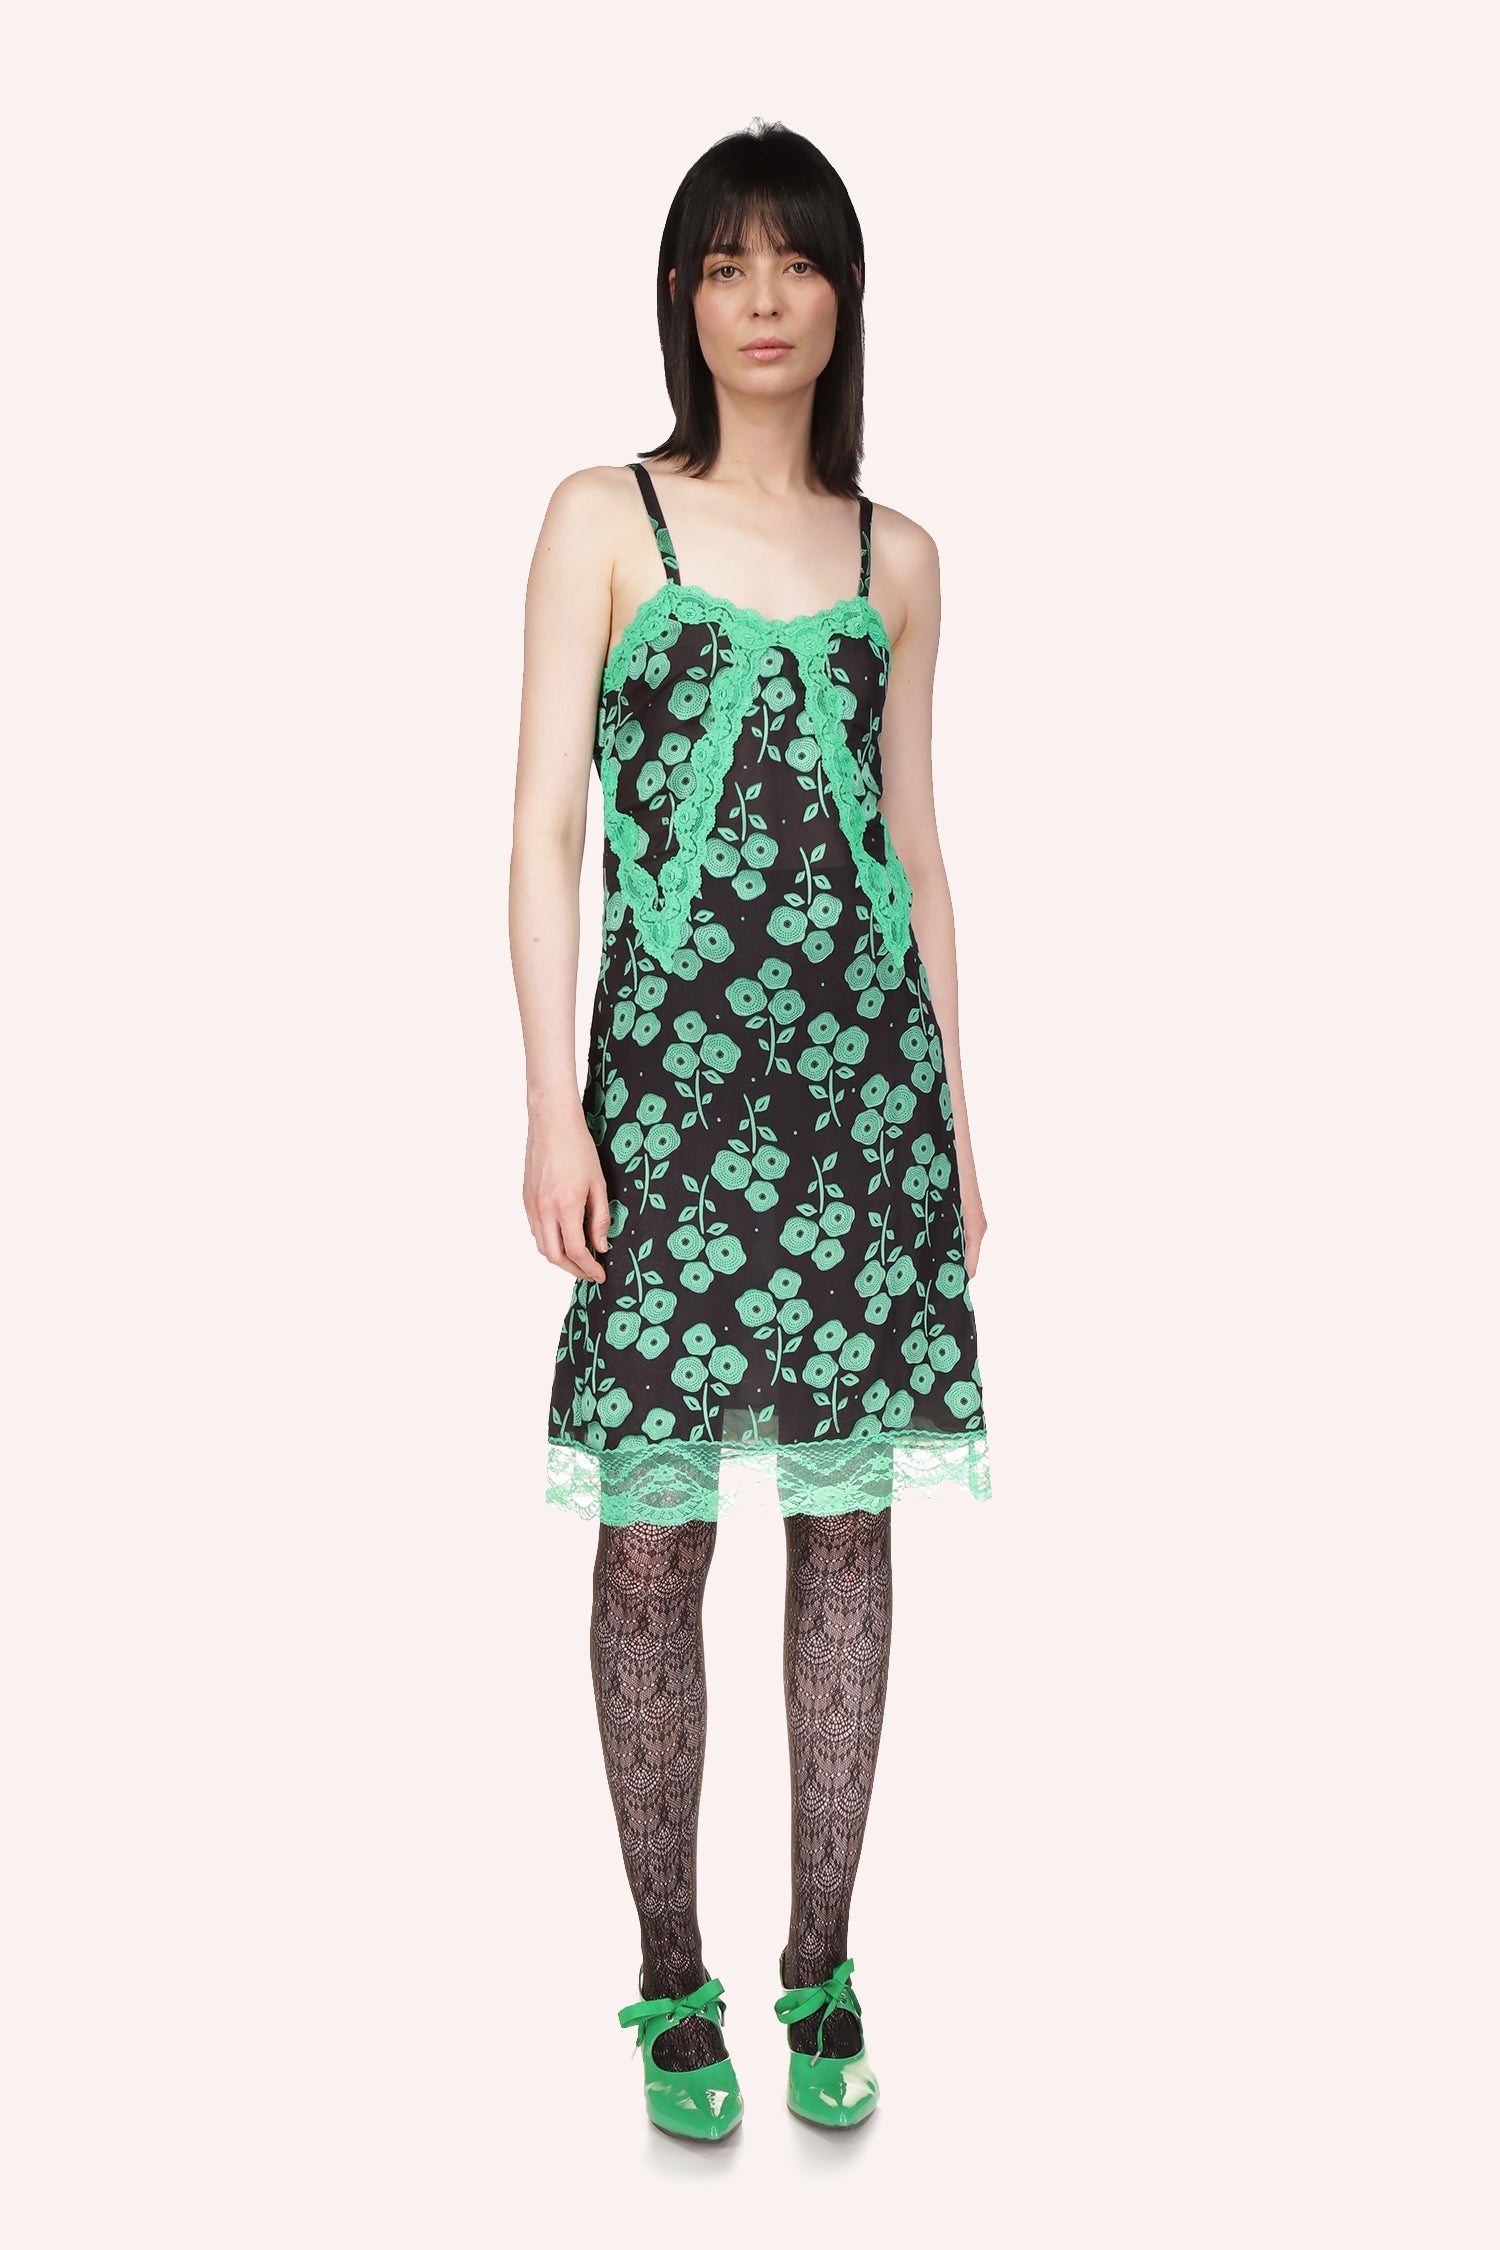 Black dress, green floral pattern, green v-lace, sleeveless, 2-straps, knees-long, translucent green lace at the bottom